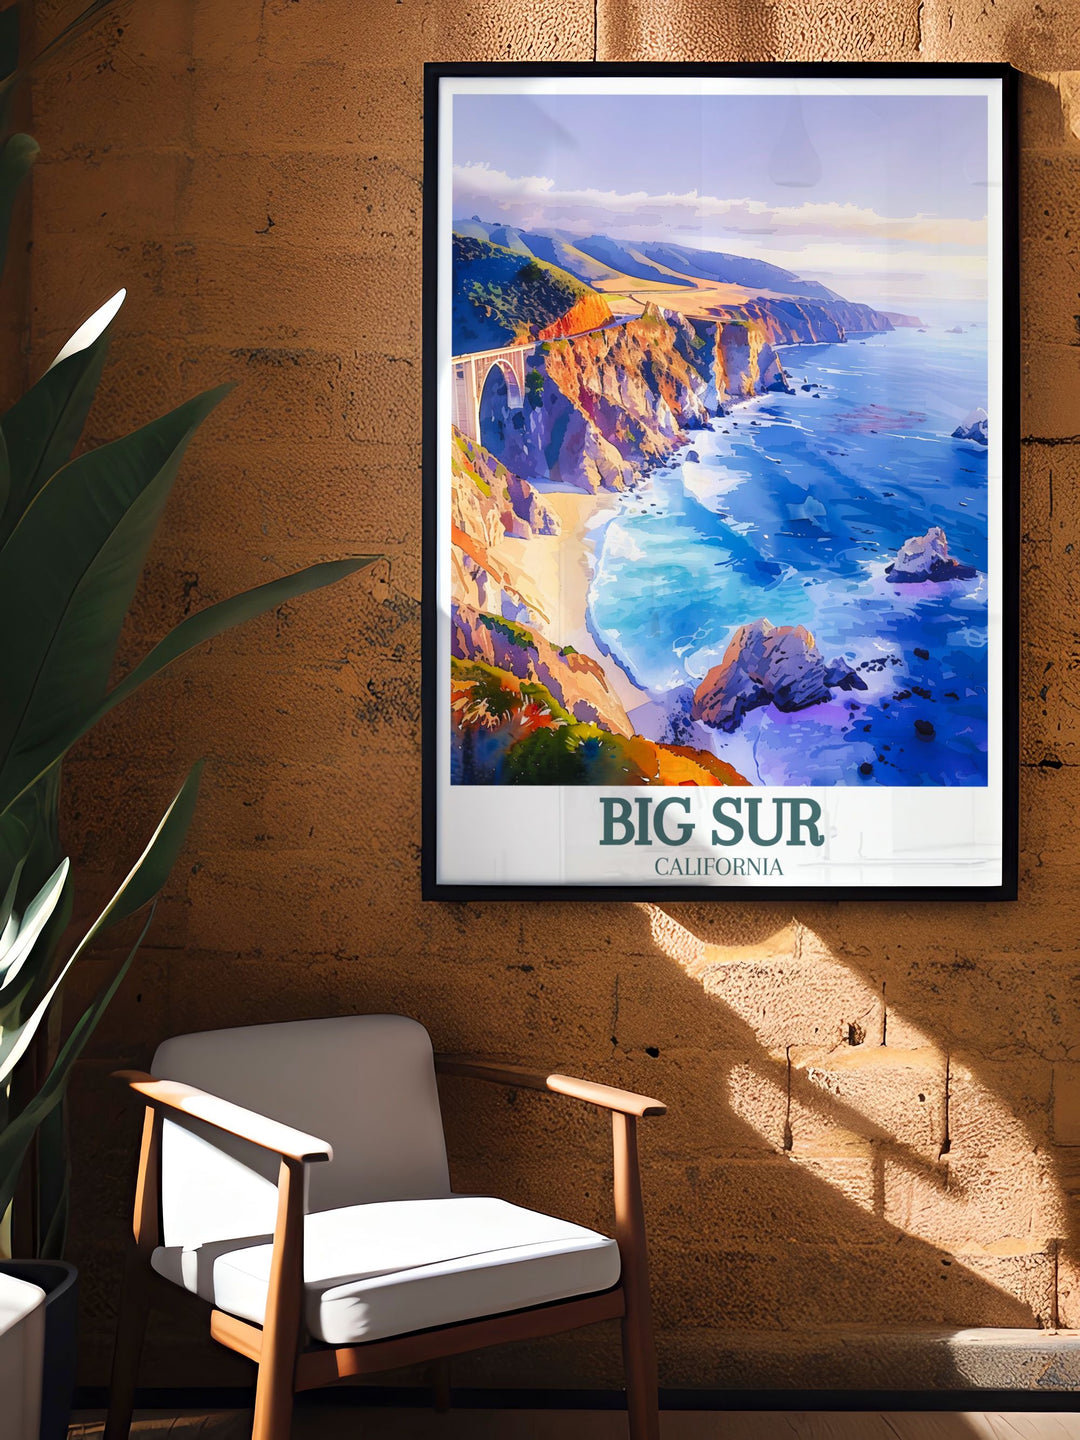 Capture the essence of Californias coastal attractions with this poster featuring Big Surs stunning landscapes and the iconic Bixby Creek Bridge, perfect for enhancing any living space with its scenic charm.